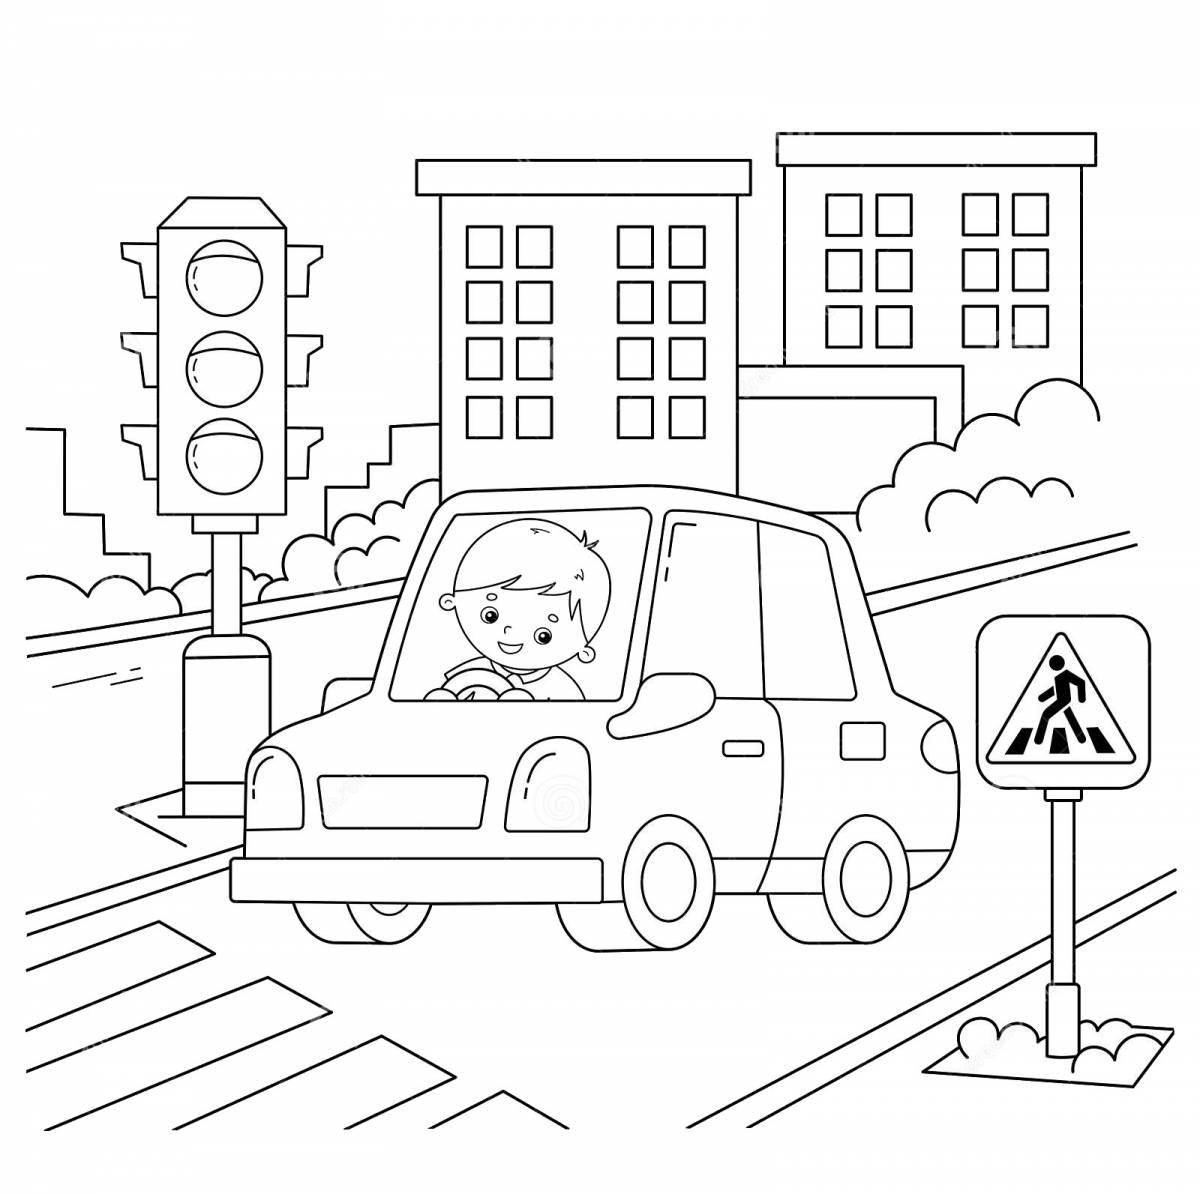 Attractive traffic light coloring page for little ones